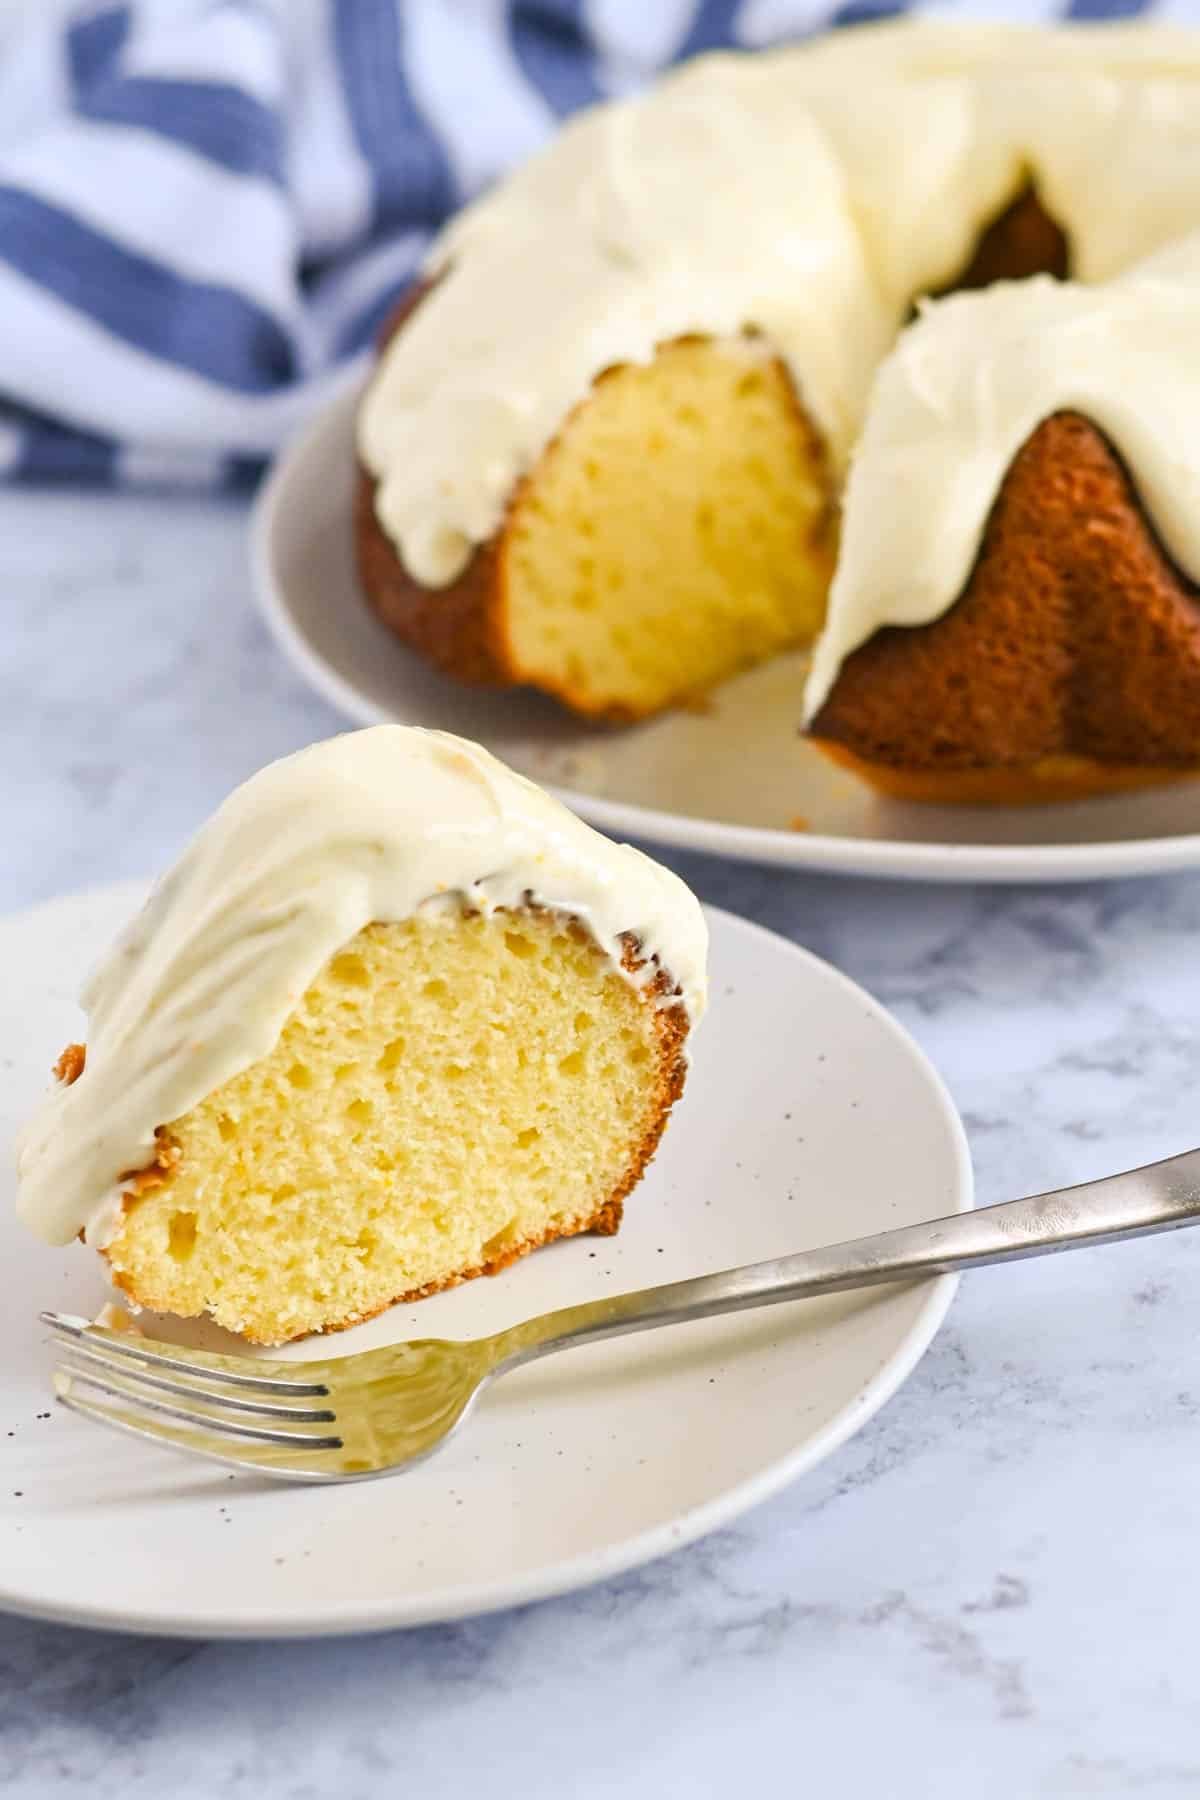 A slice of orange cake with cream cheese frosting rests on a white plate with a fork, while the rest of the frosted bundt cake sits on a second plate in the background.